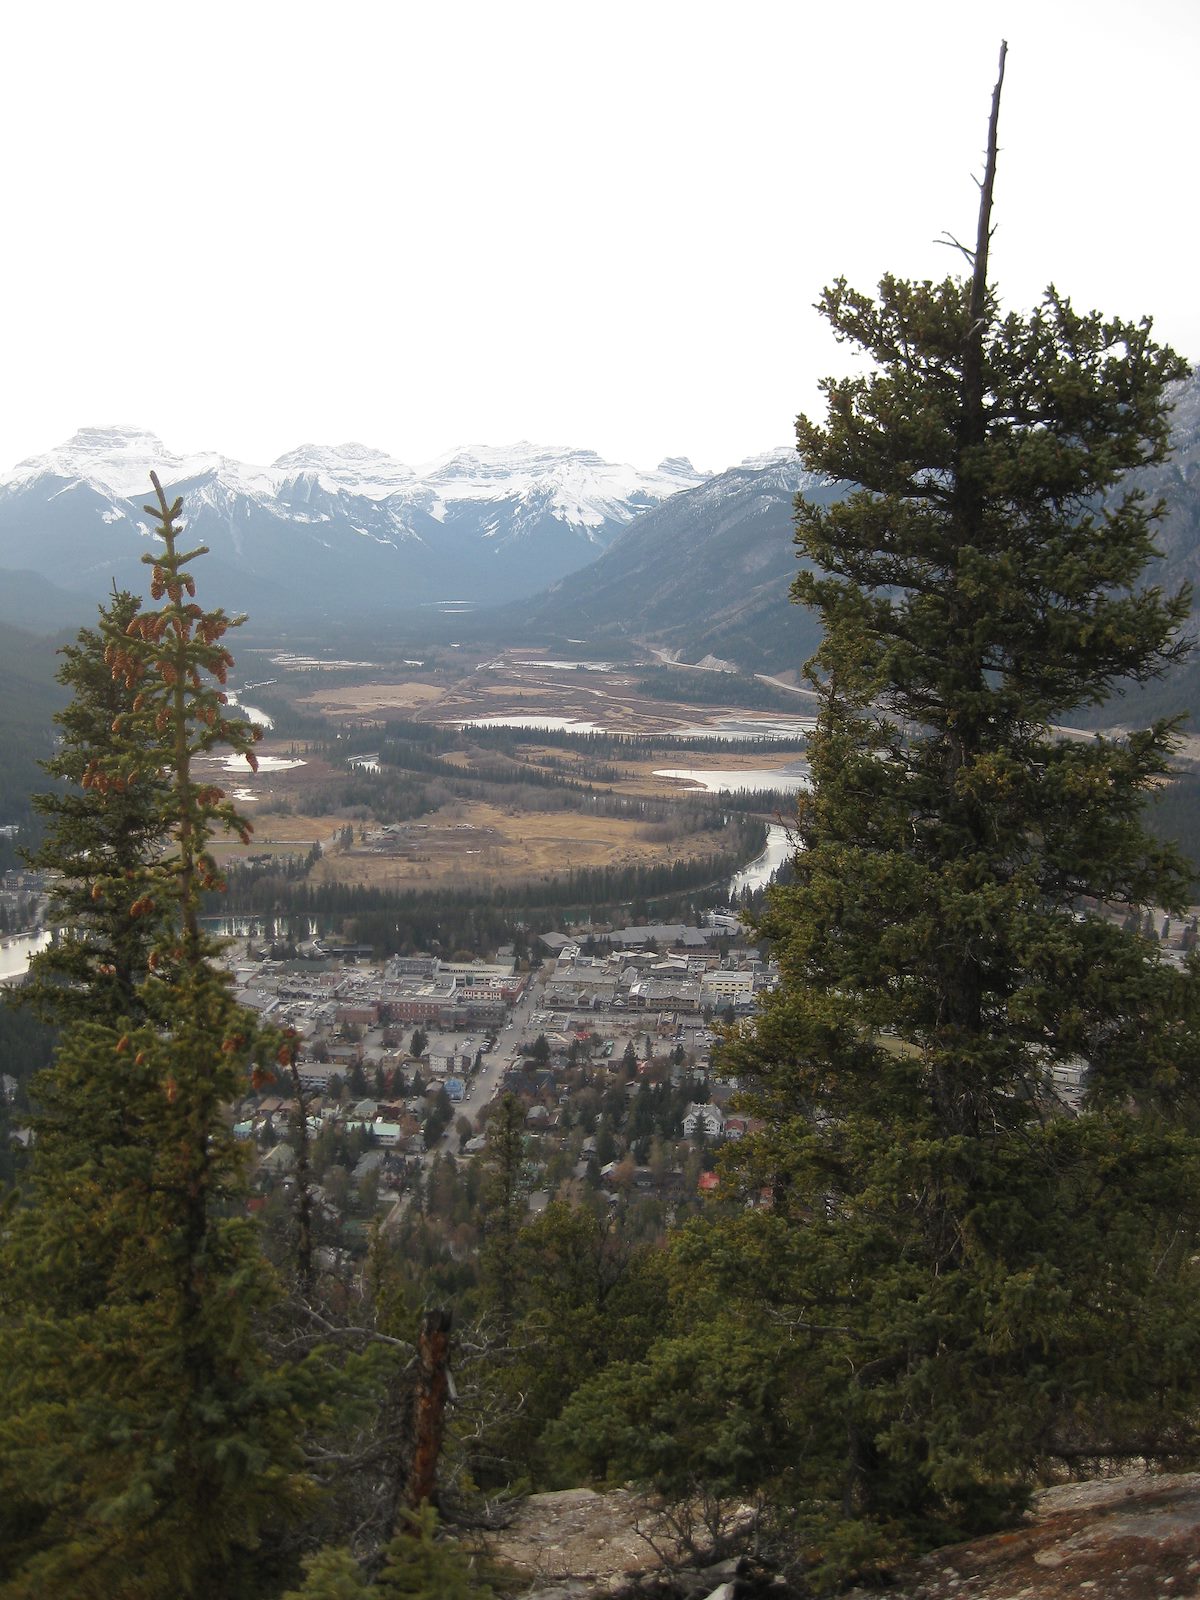 2009 November Looking down into Banff from the Tunnel Mountain Trail